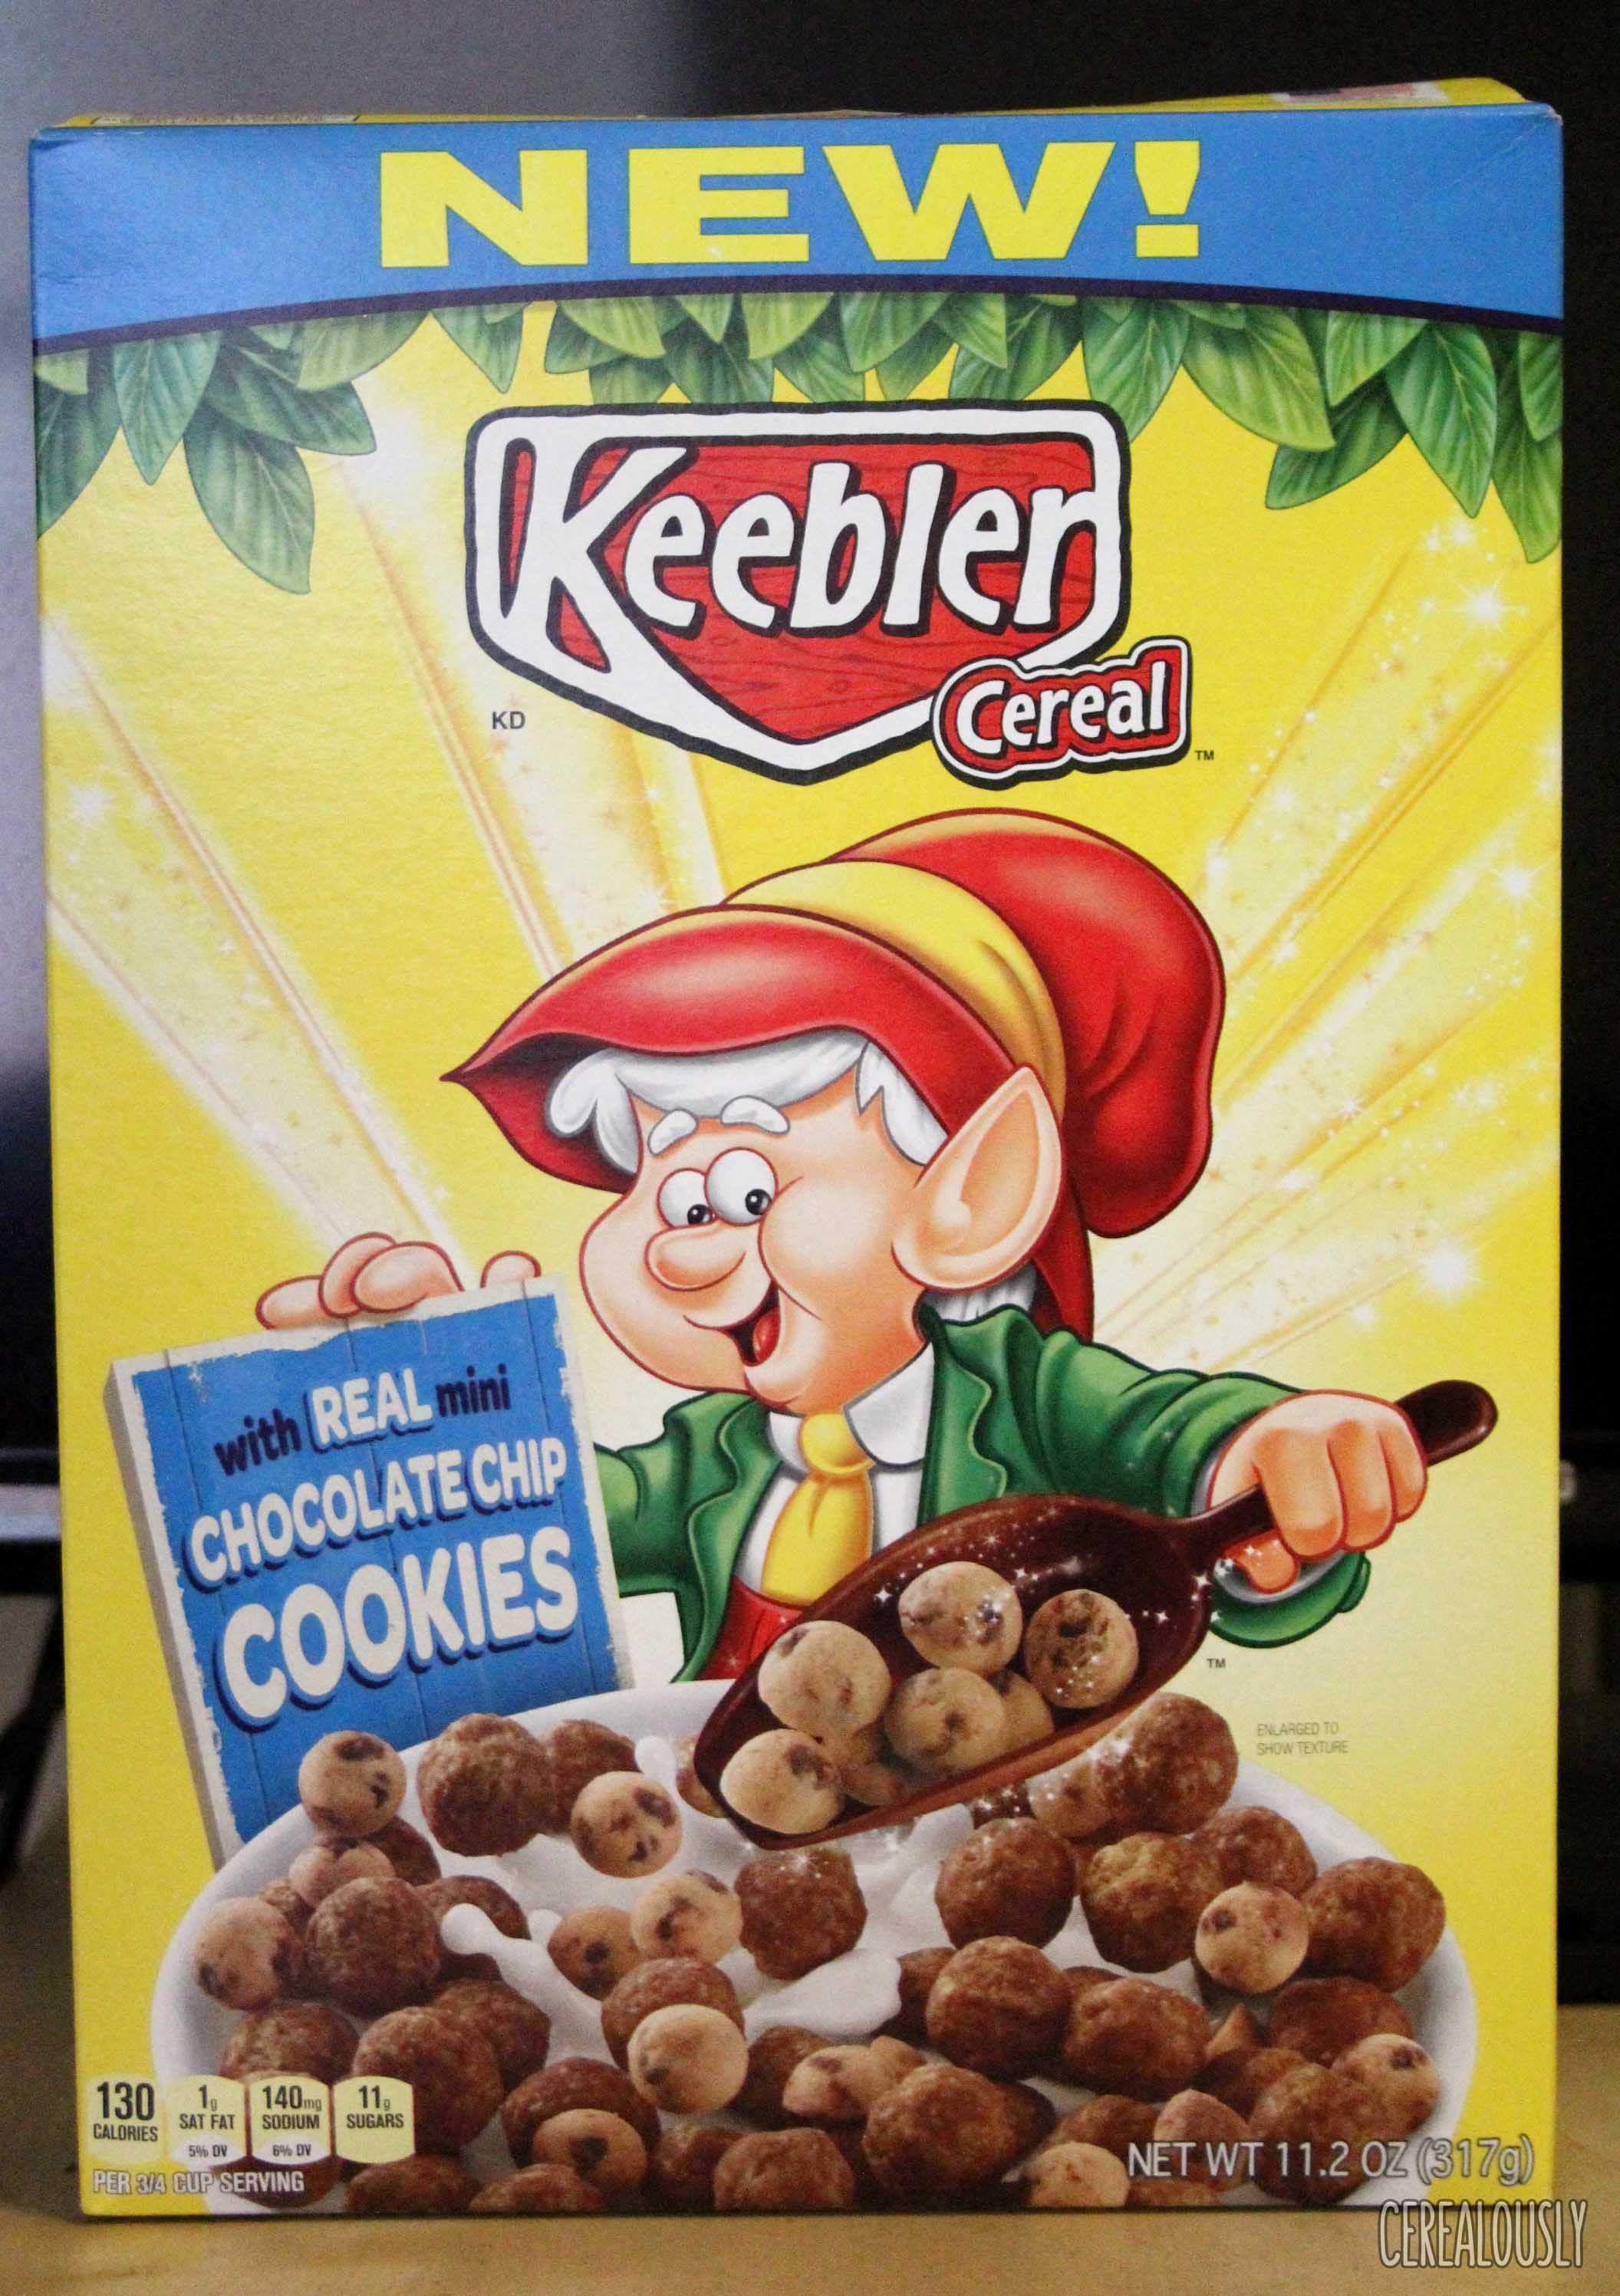 Review: Keebler Cereal with Real Mini Chocolate Chip Cookies